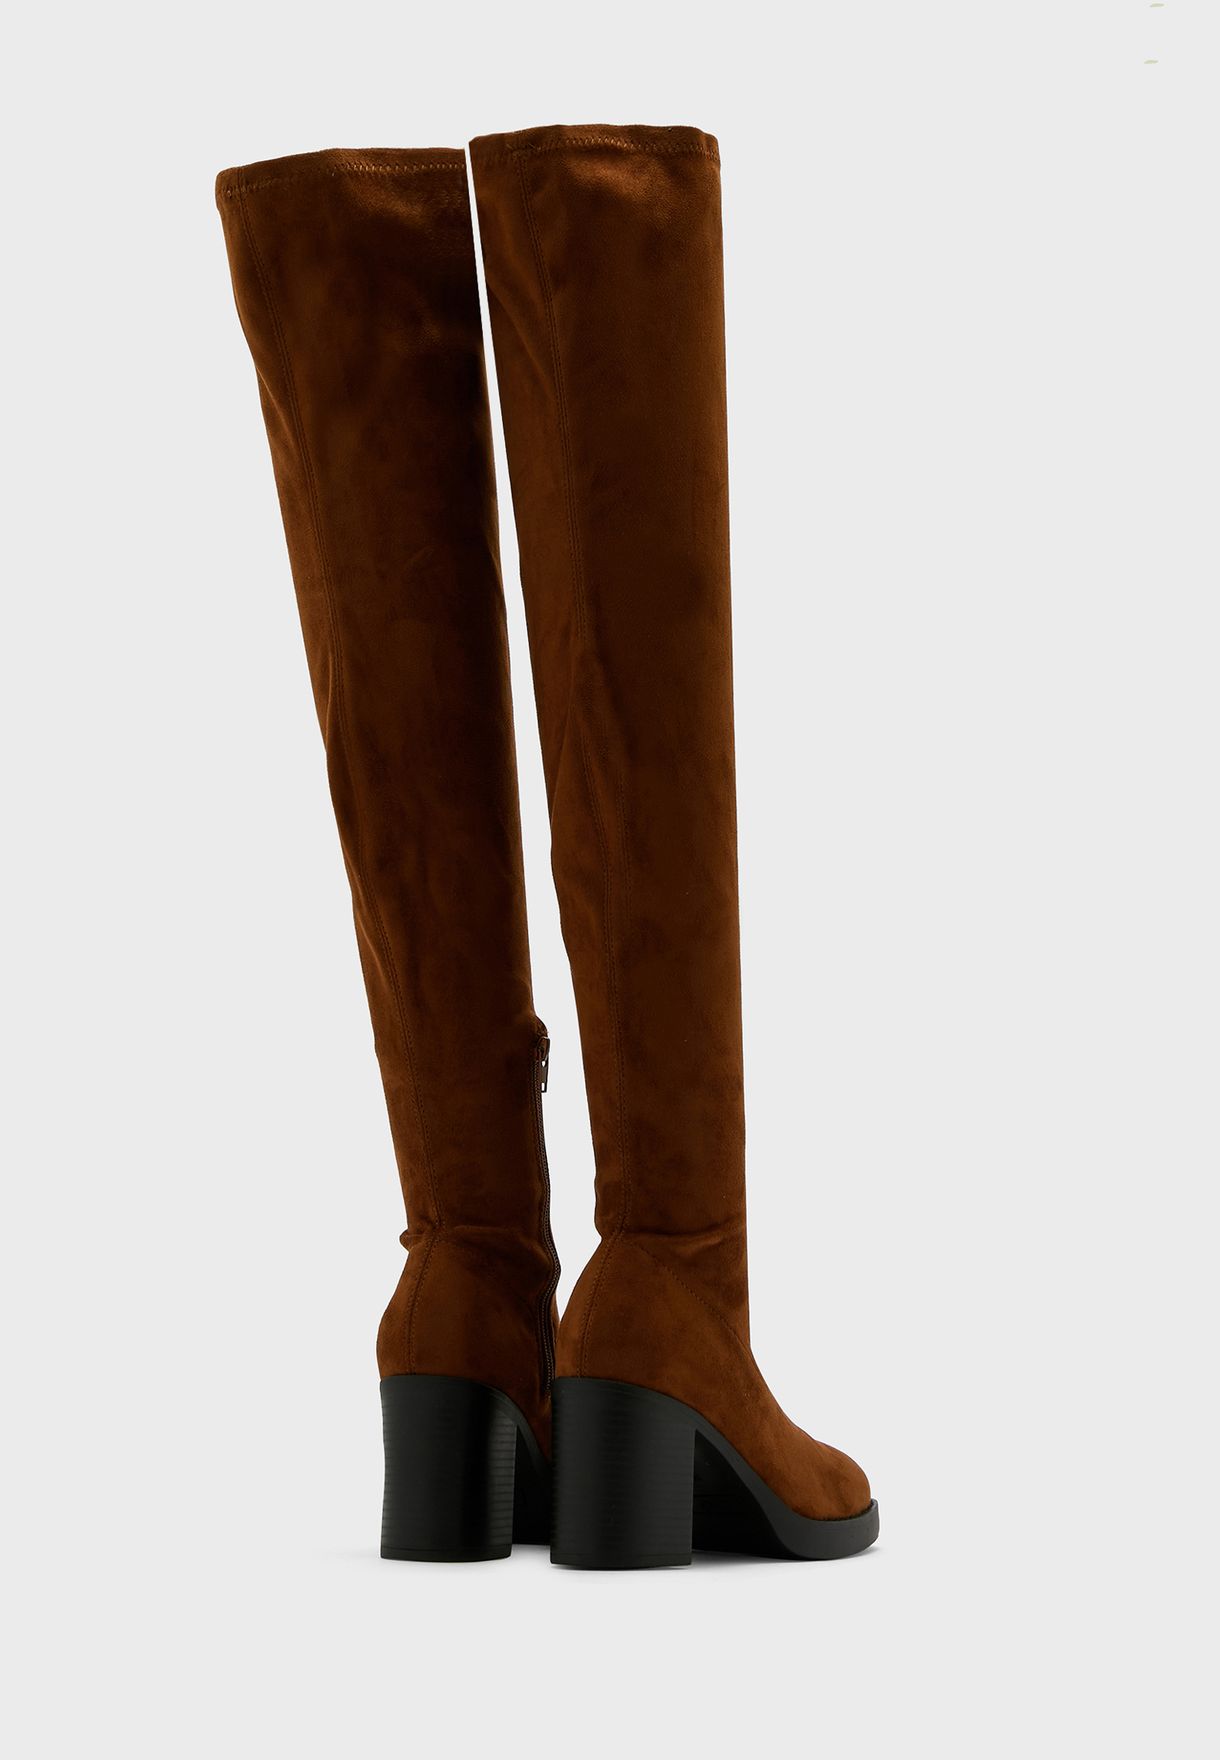 Over knee Boots